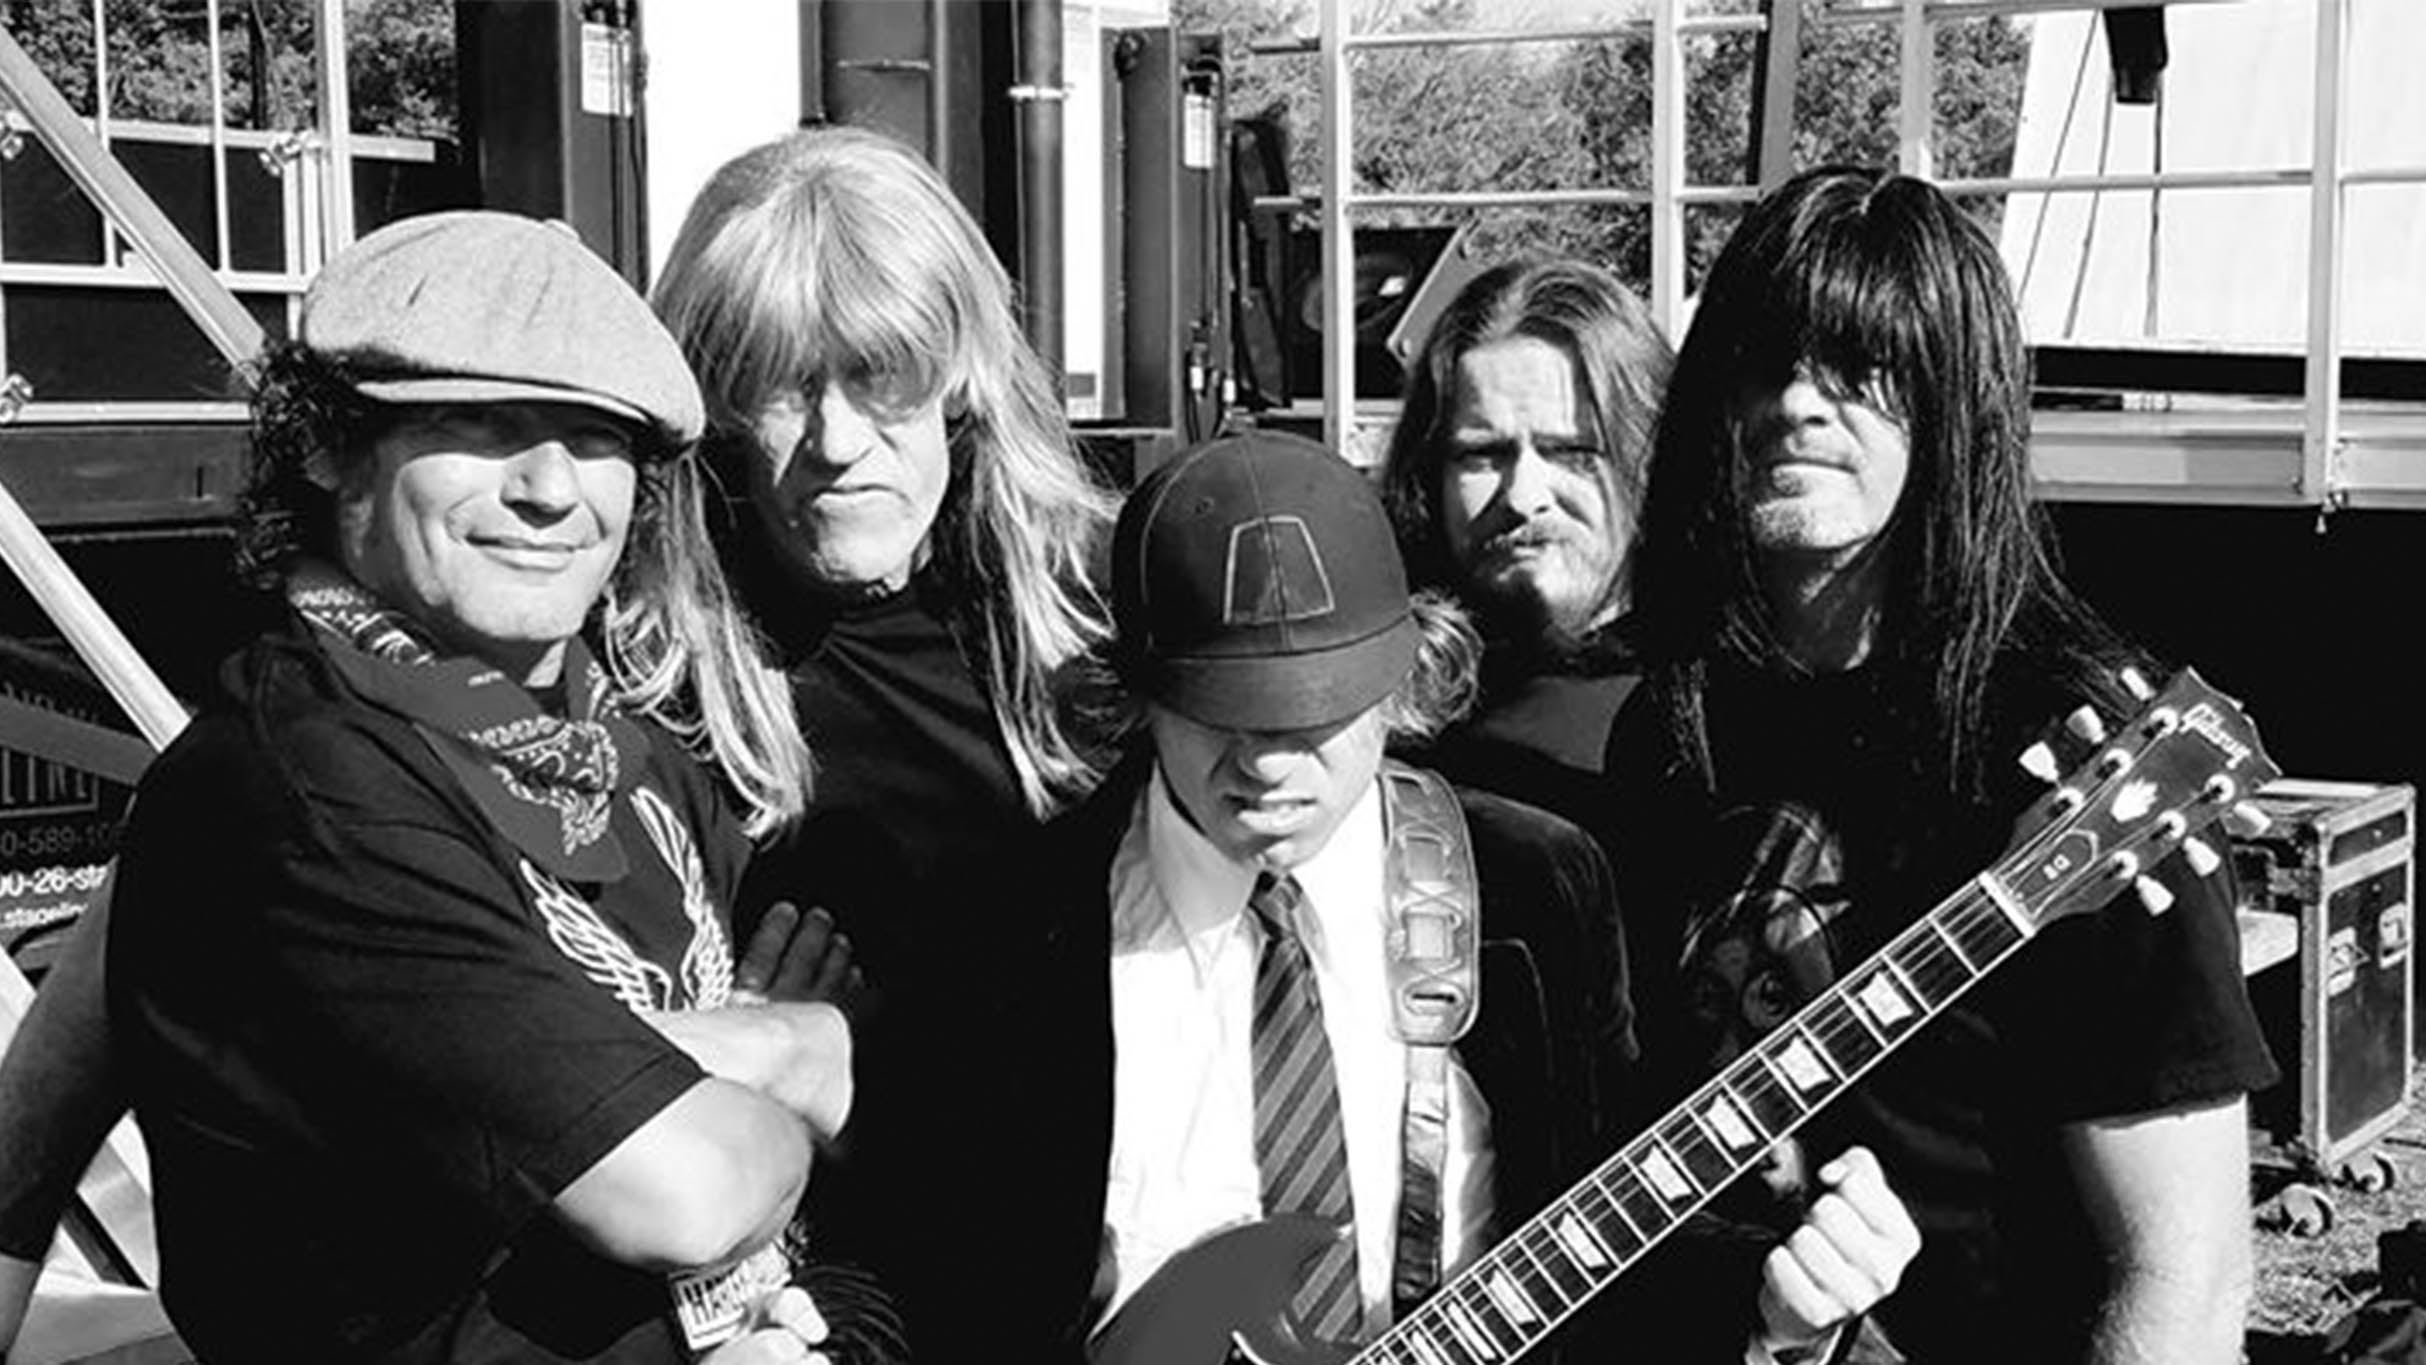 Noise Pollution - AC/DC Experience in Las Vegas promo photo for Social presale offer code